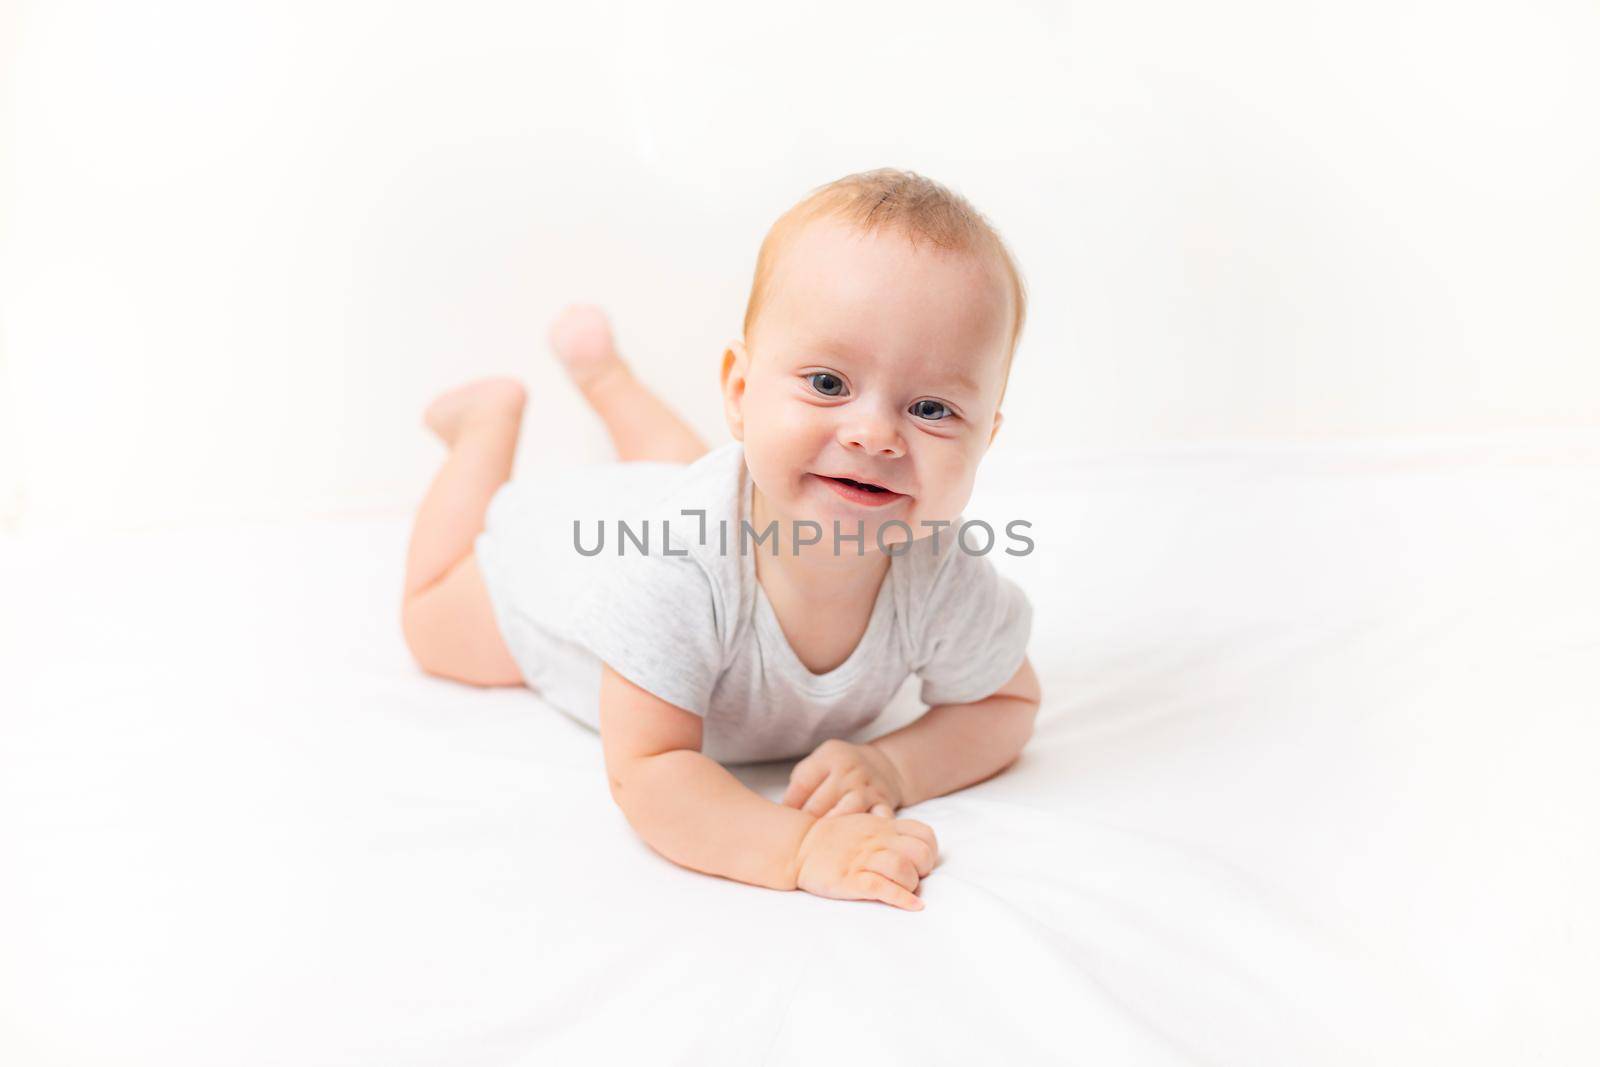 The baby lies on a white background and smiles at the camera . Advertising of children's goods. A child on a white background. Happy baby. The smile of a child. Children 's article . by alenka2194